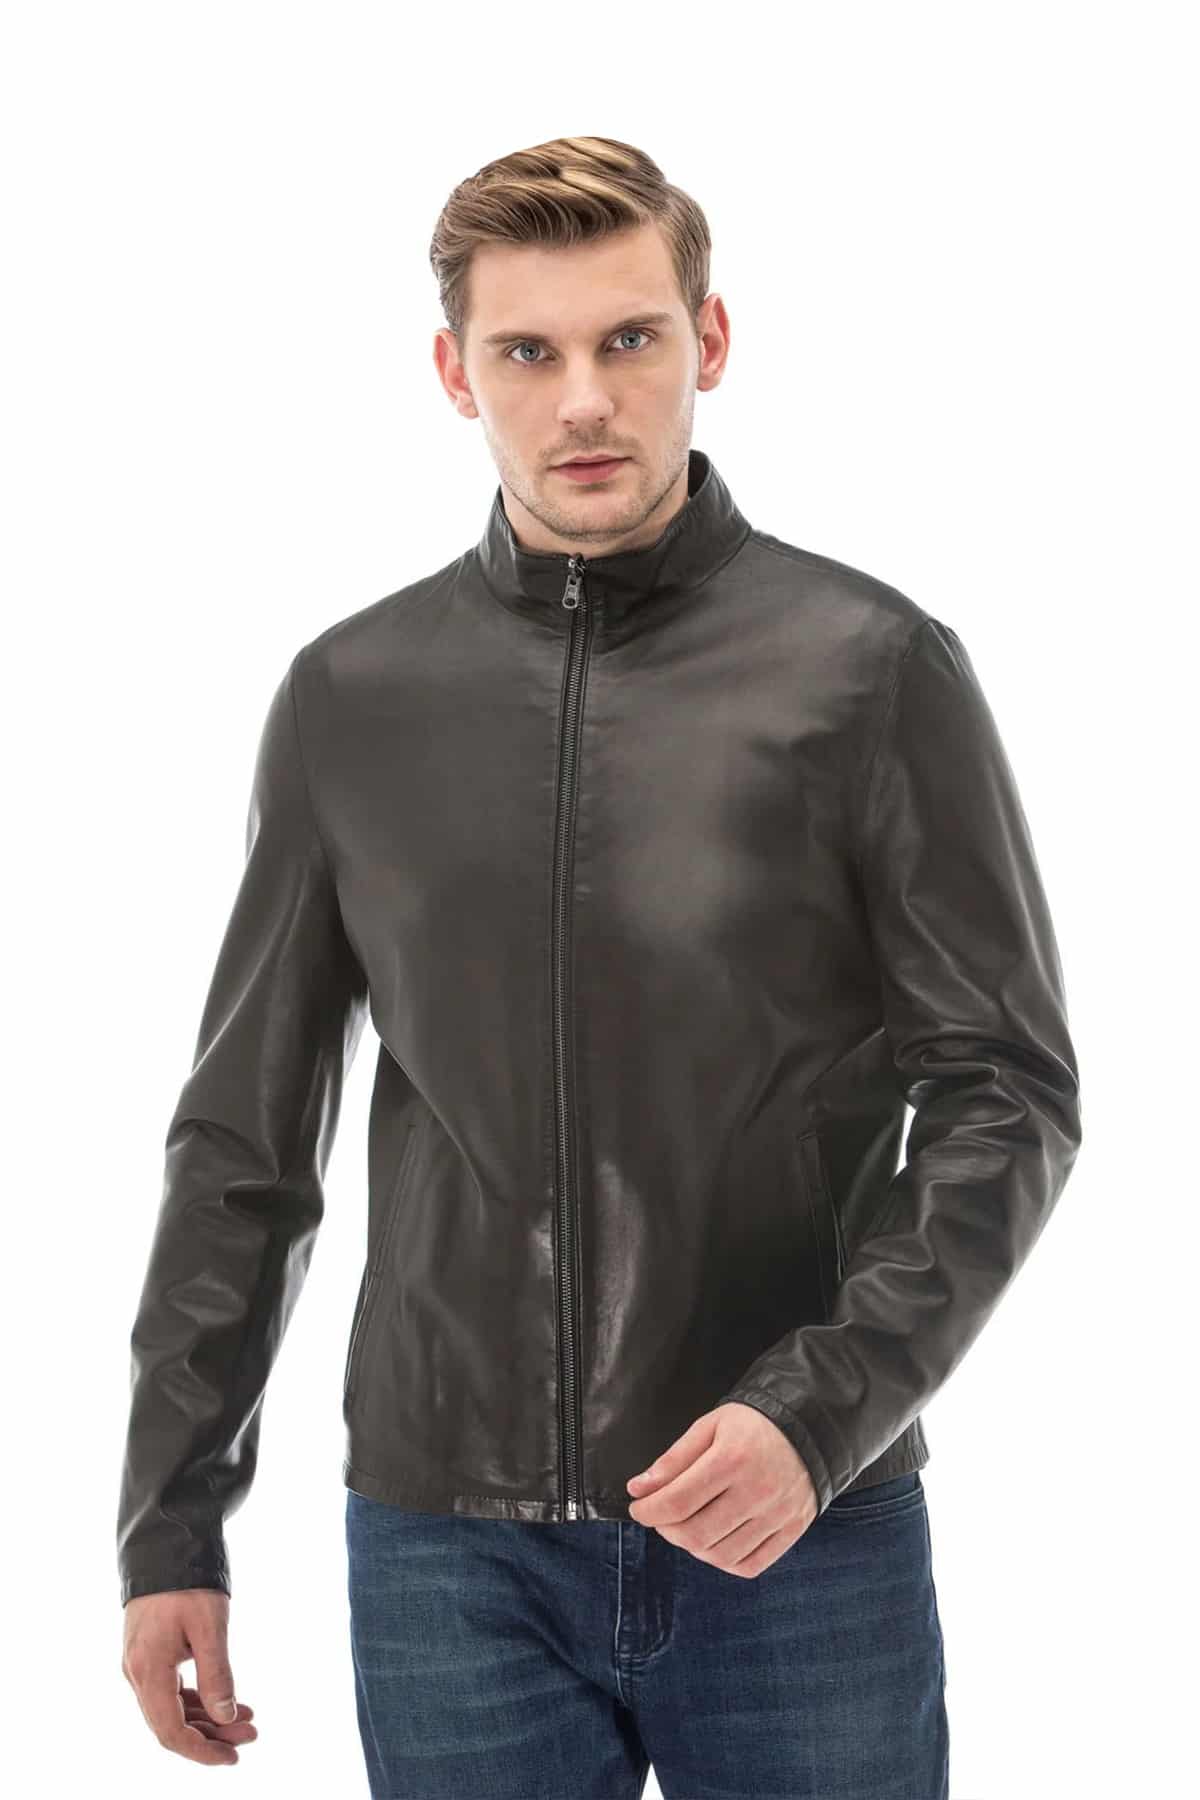 Men's 100% Real Black/Gray Leather Jacket